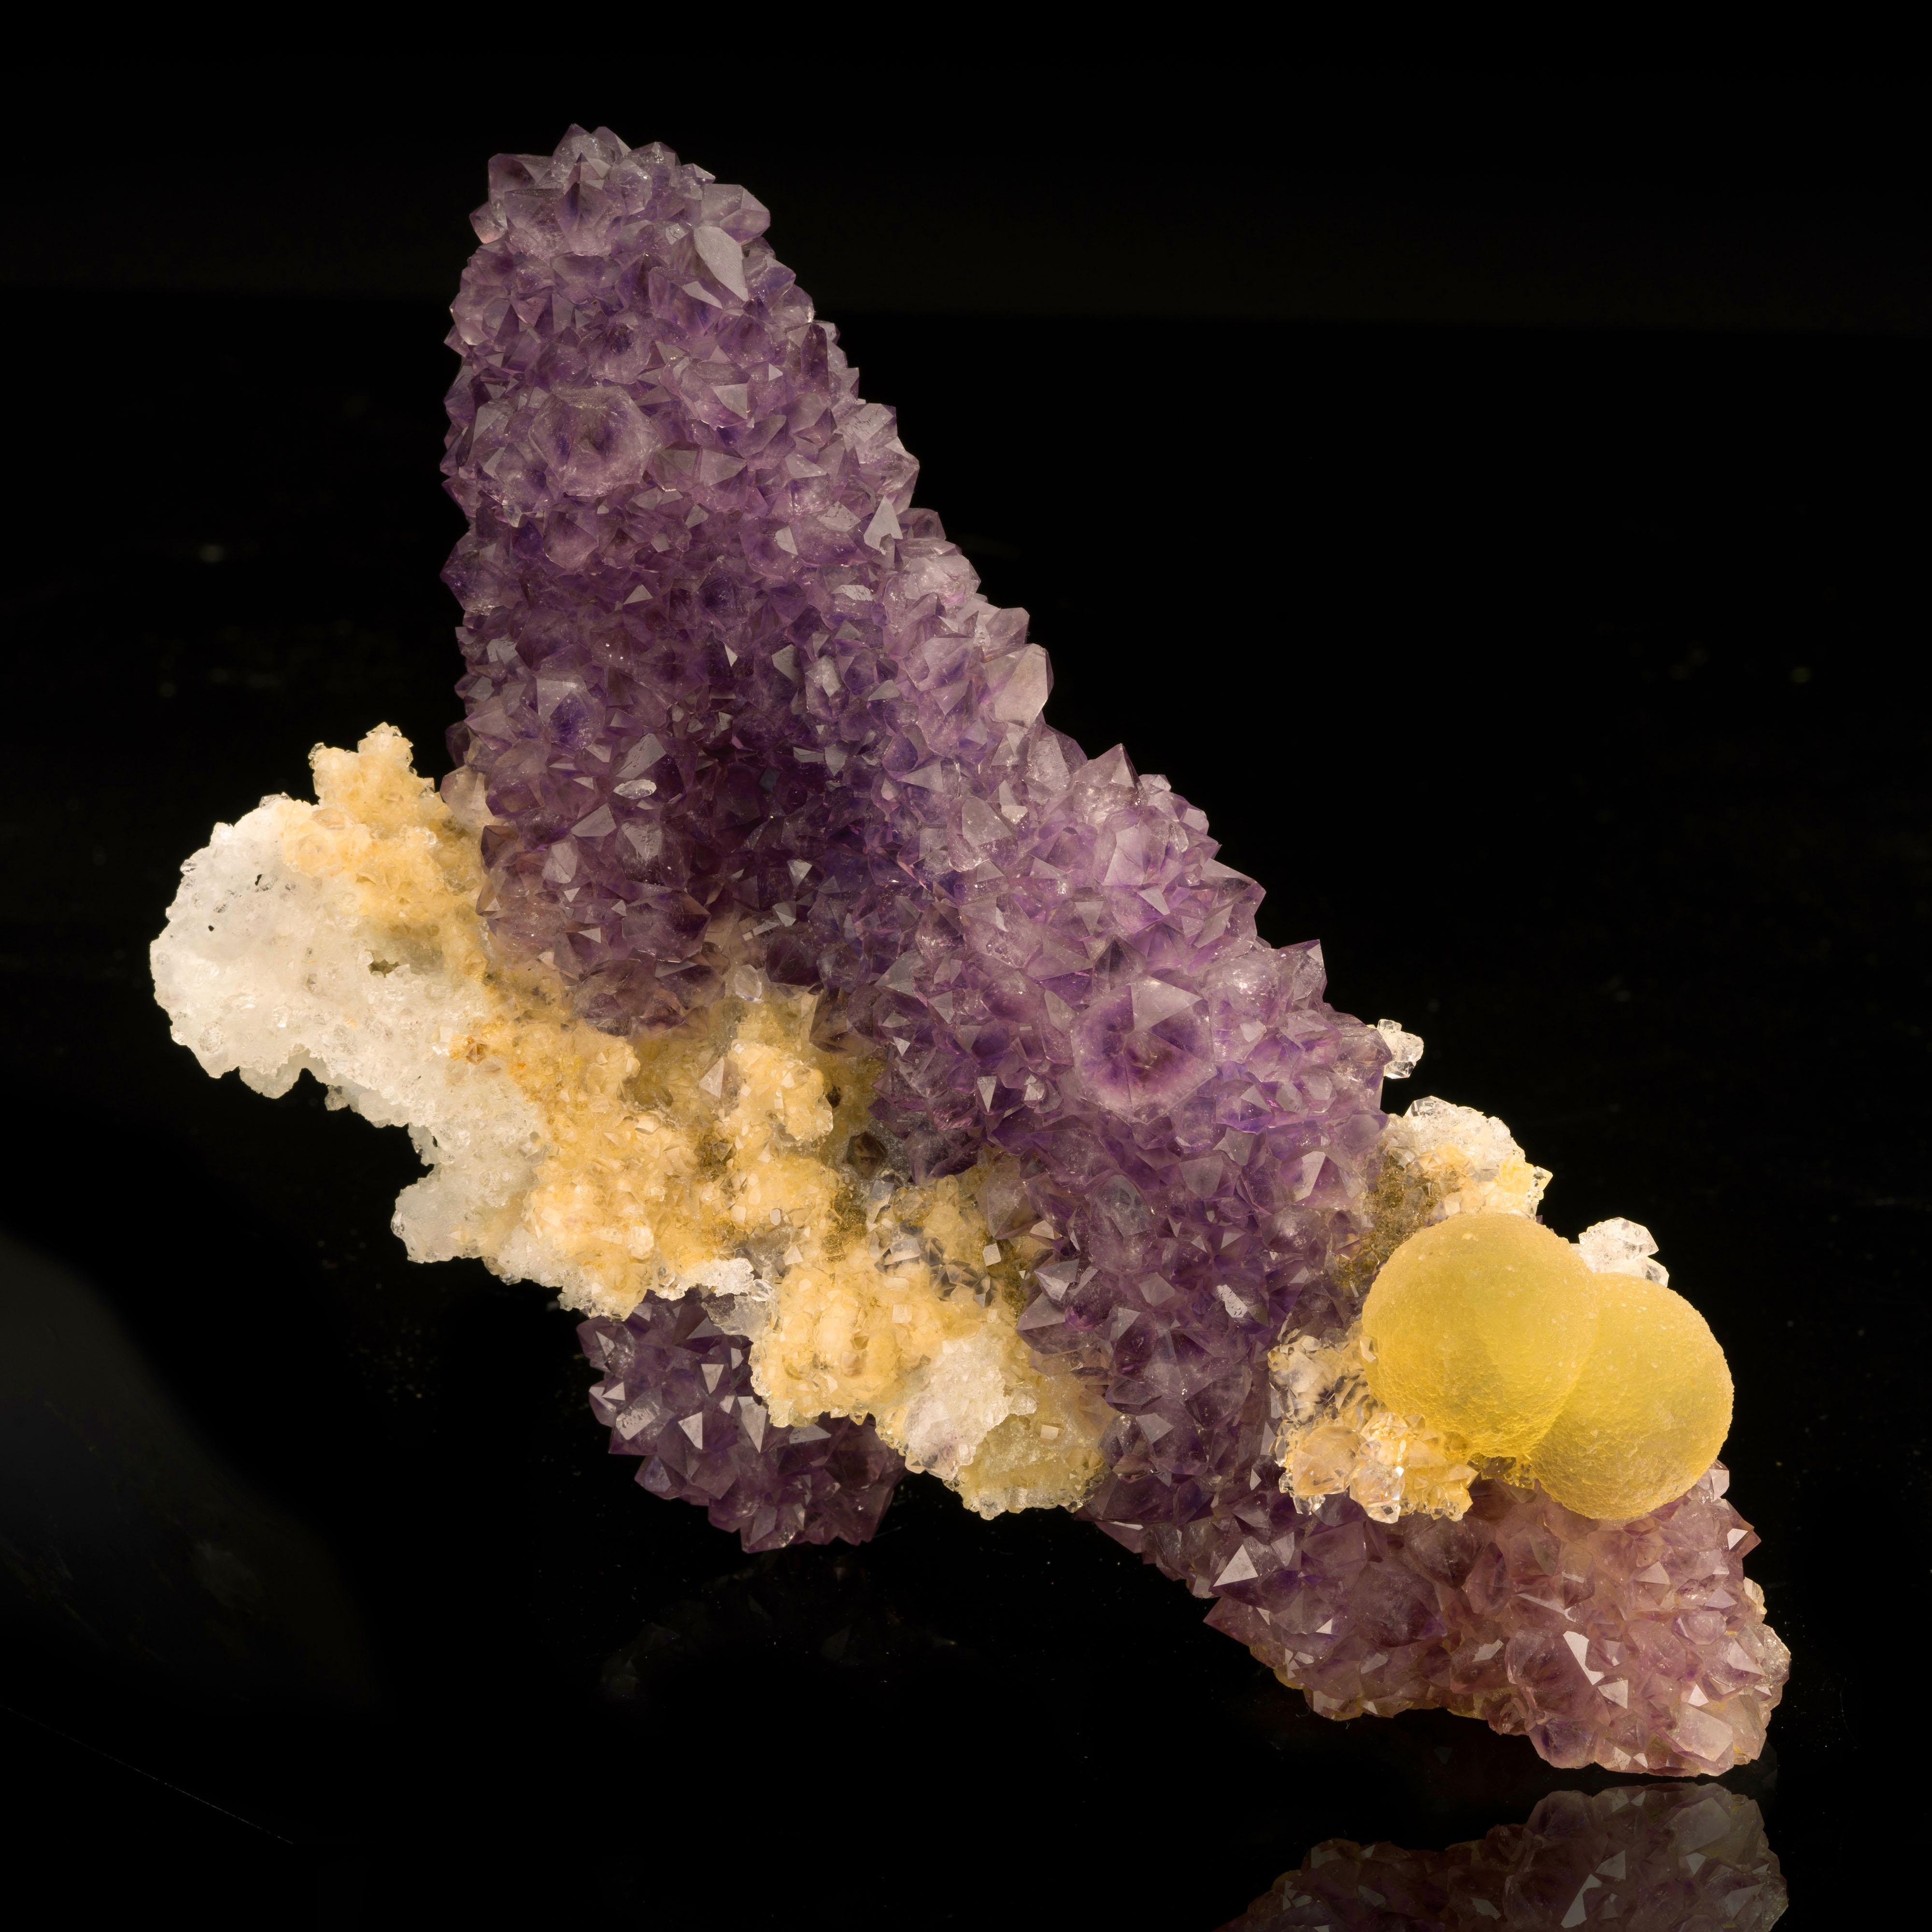 Puna, India

This amethyst stalactite is uniquely shaped like a fashionable high heel and is accented by two botryoidal fluorite spheres that are perfectly placed to resemble a stylish shoe clip as well as by a calcite cluster that juts out at the